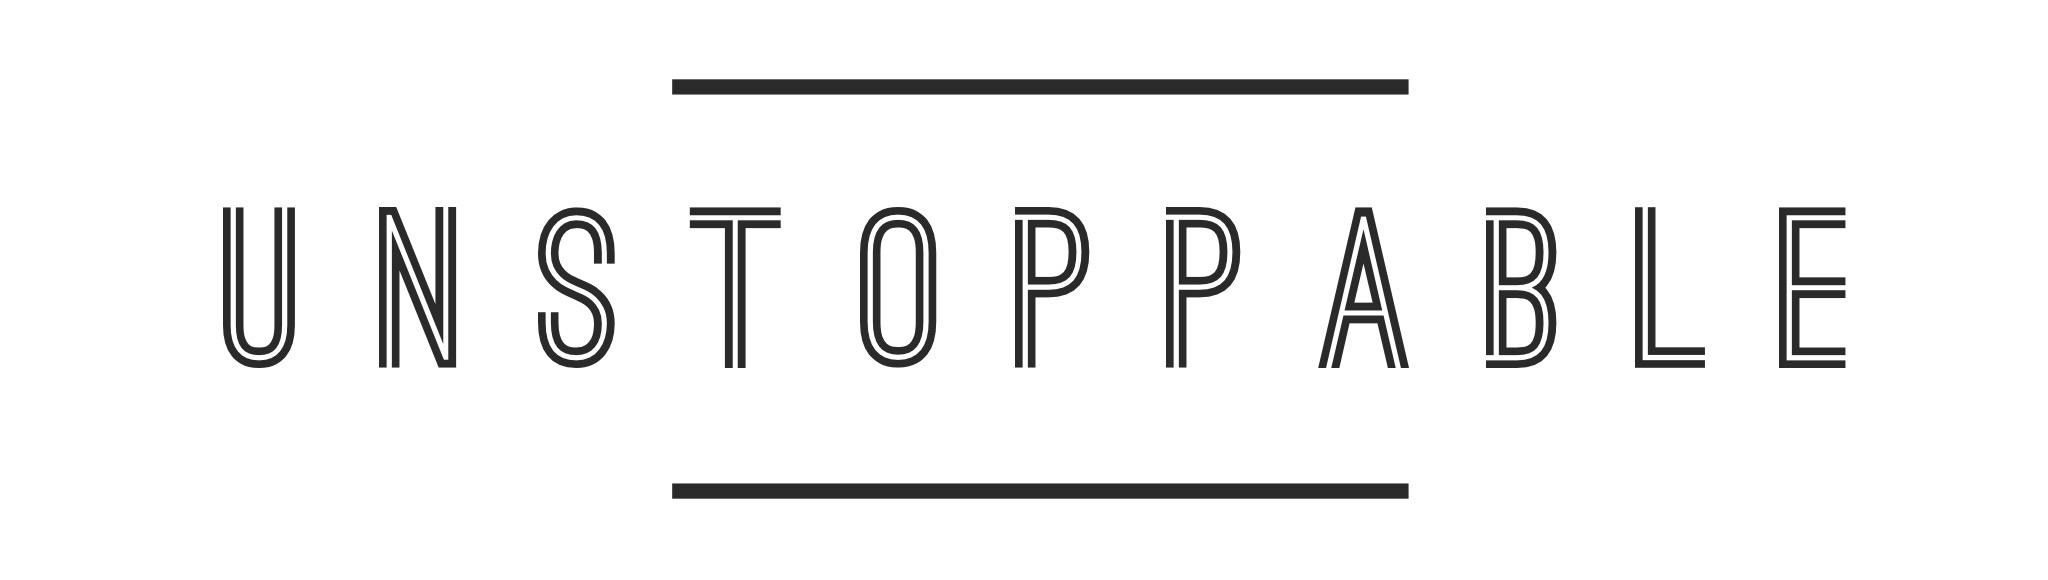 Unstoppable logo cropped